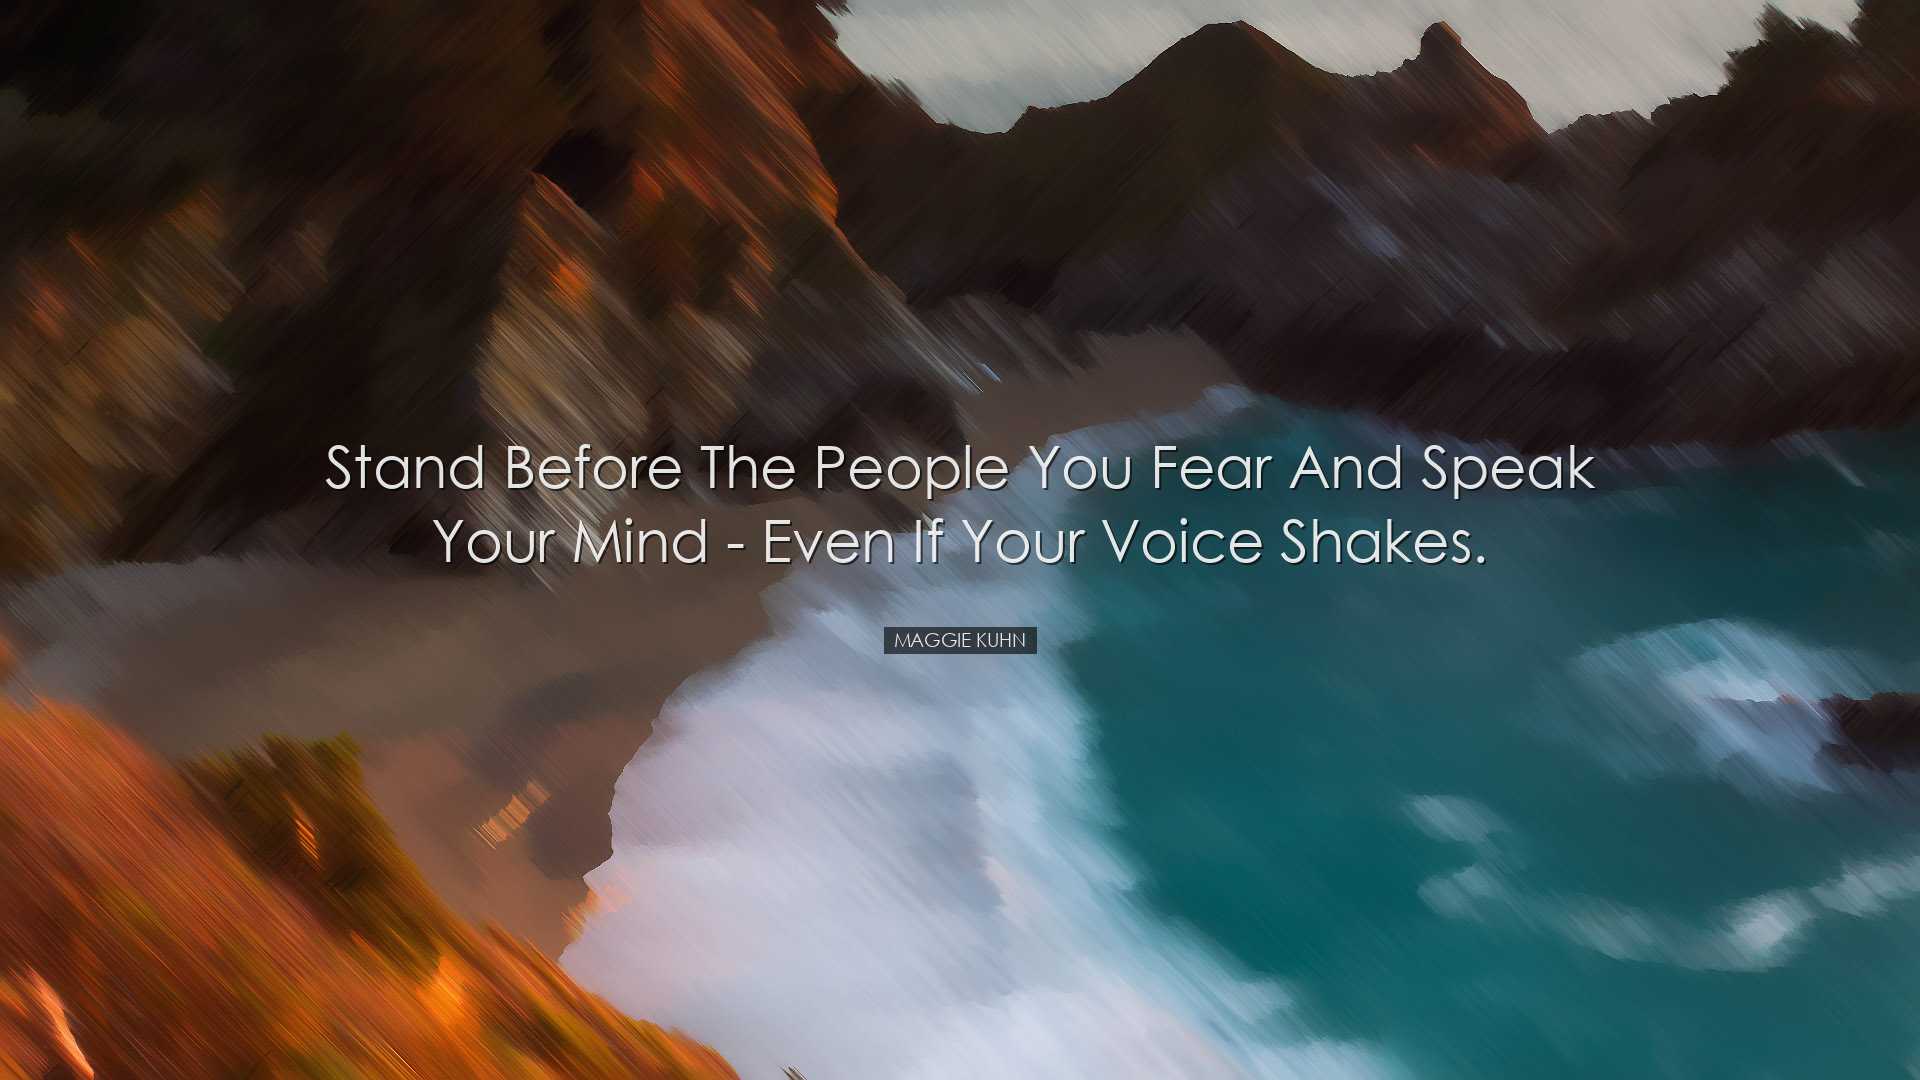 Stand before the people you fear and speak your mind - even if you